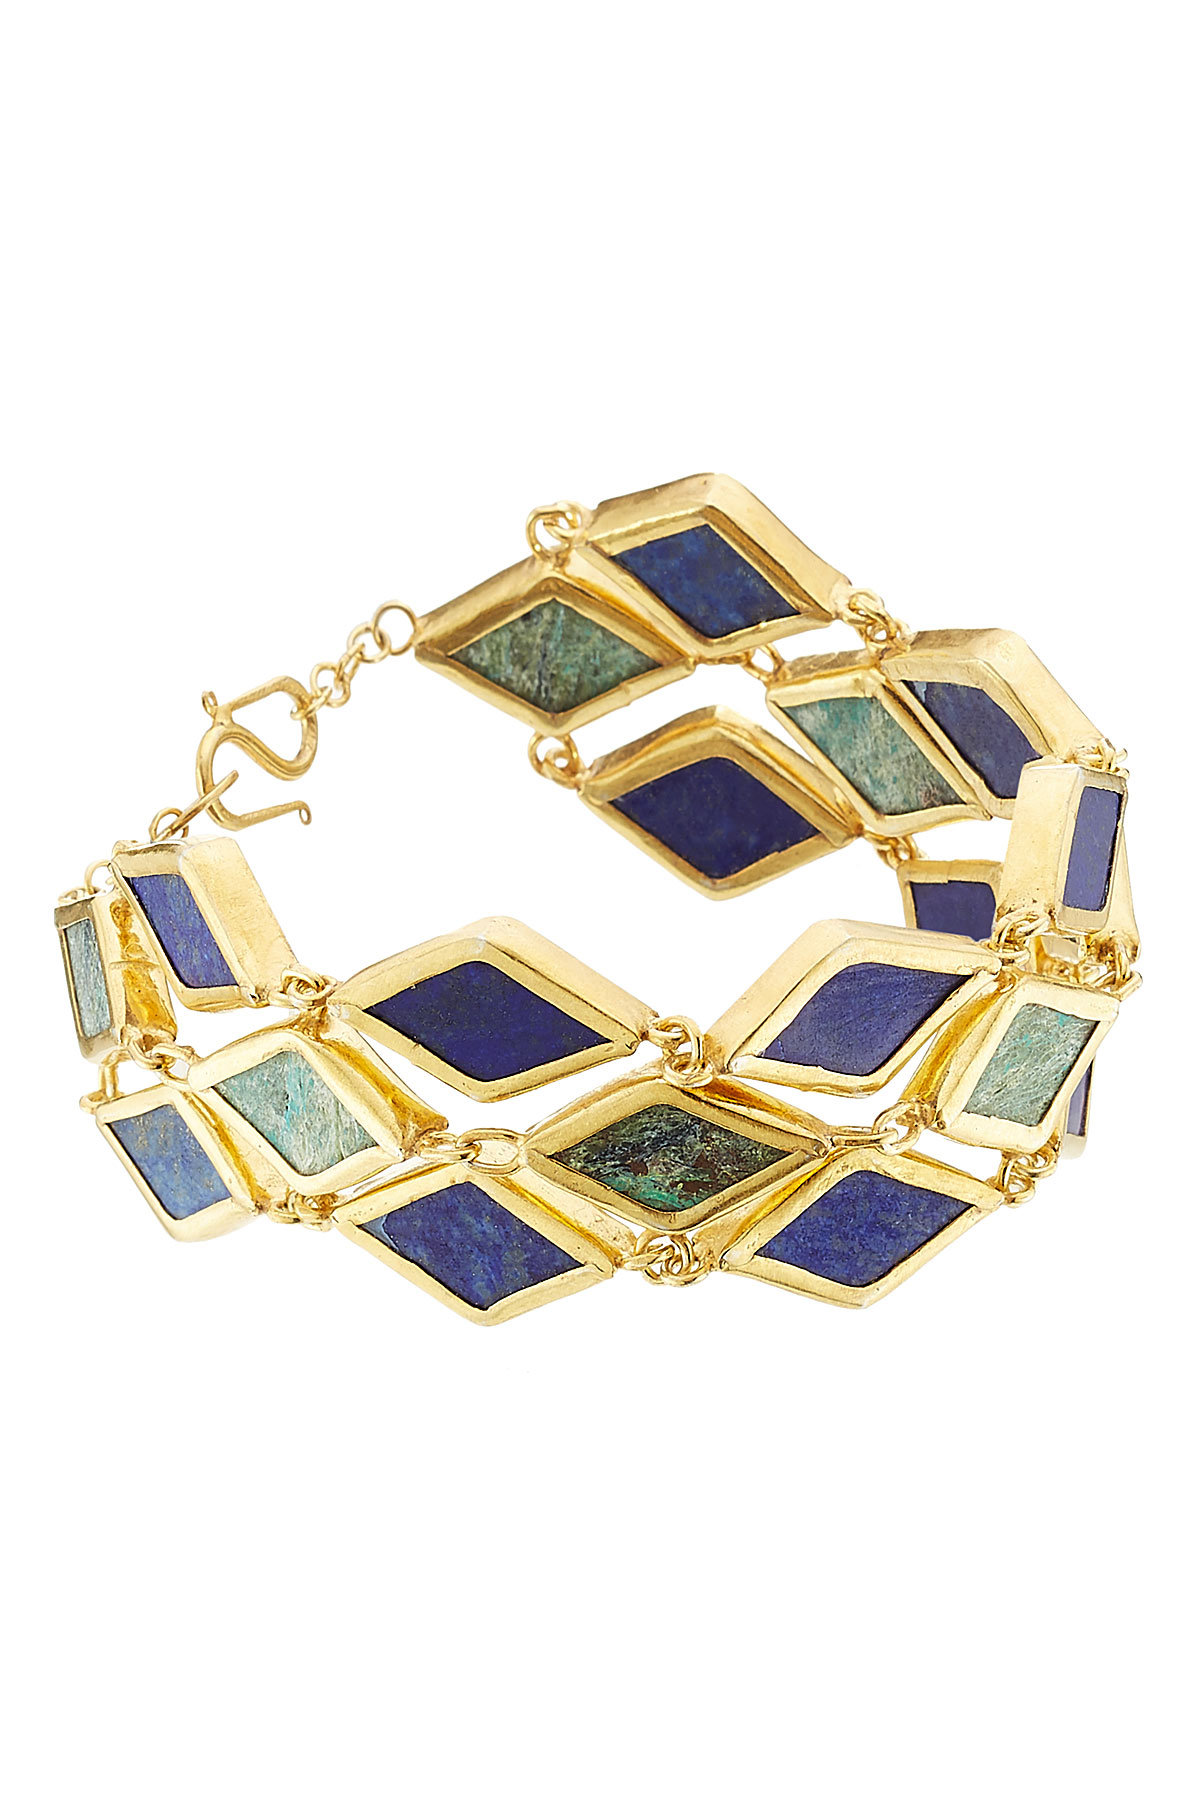 Pippa Small - Gold Plated Silver Bracelet with Chrysocolla